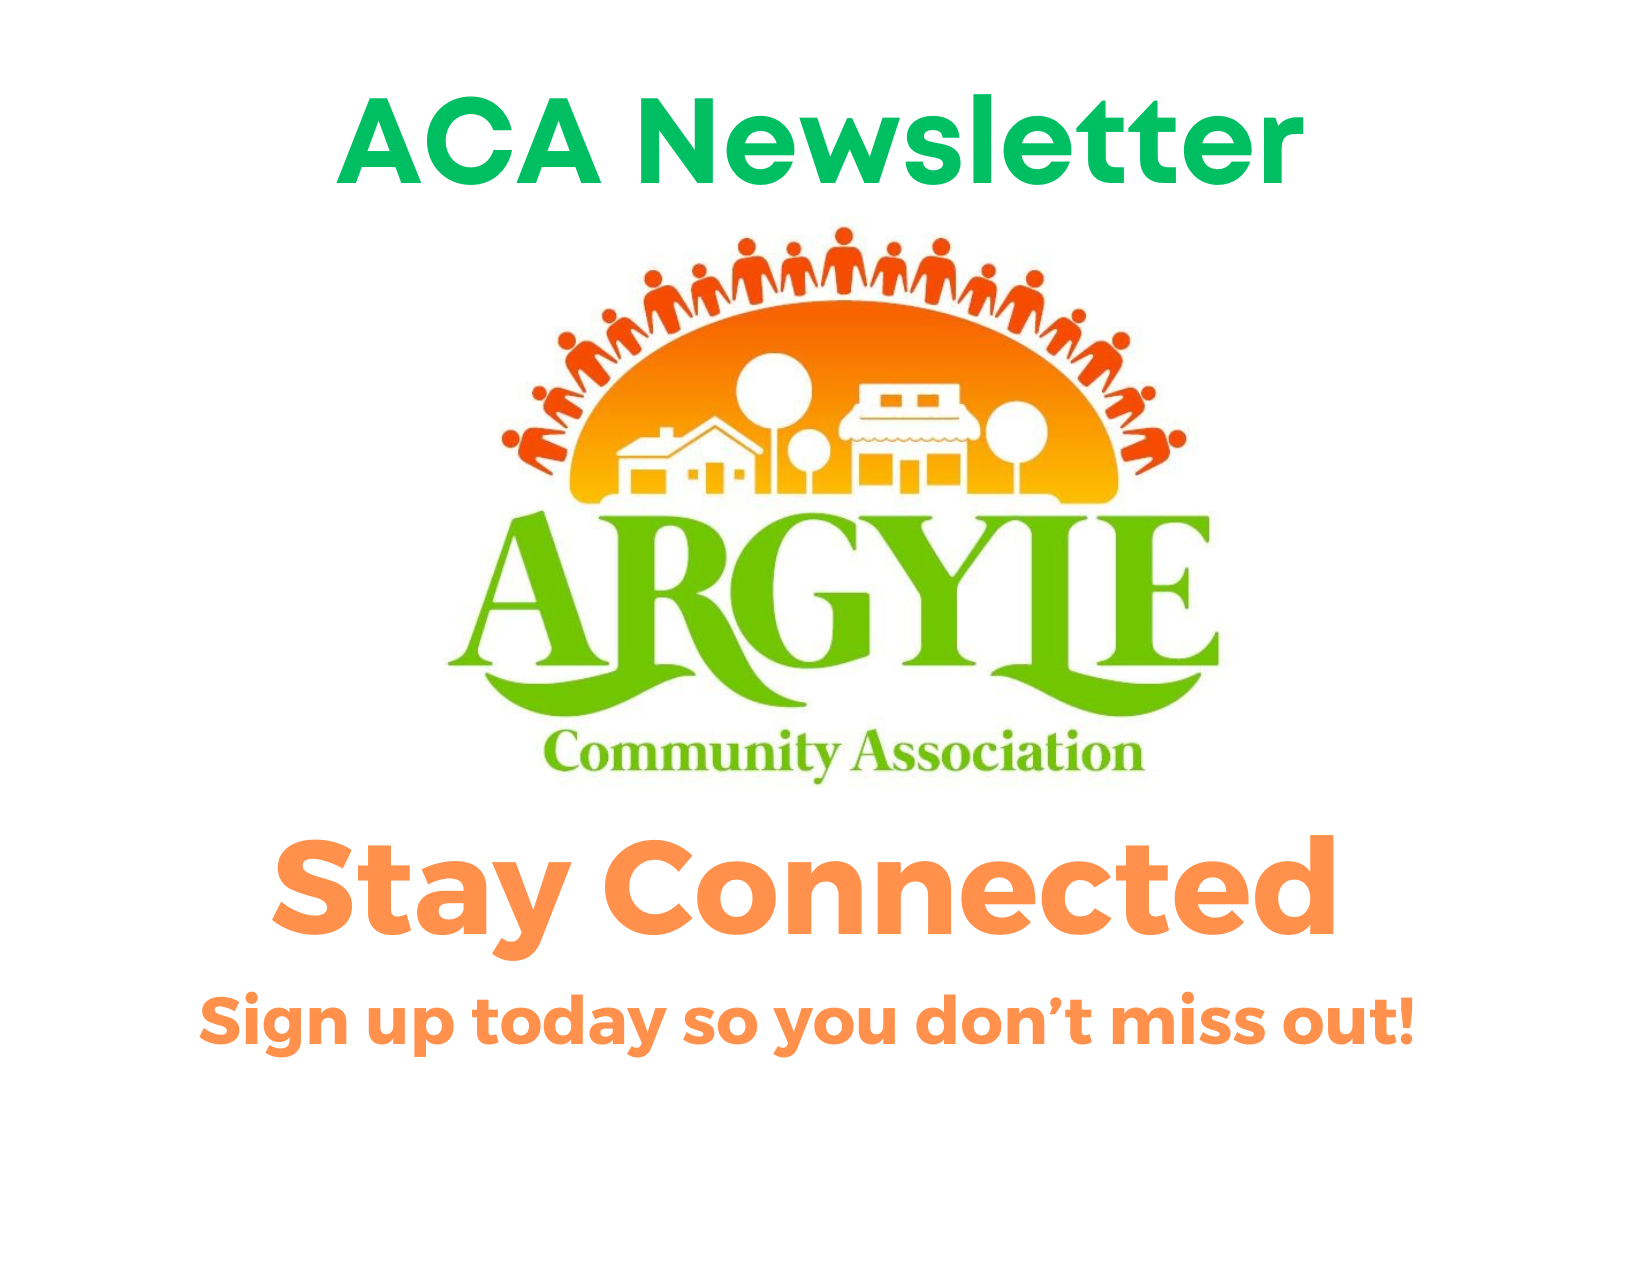 Image asking people to sign up for the ACA newsletter to stay informed